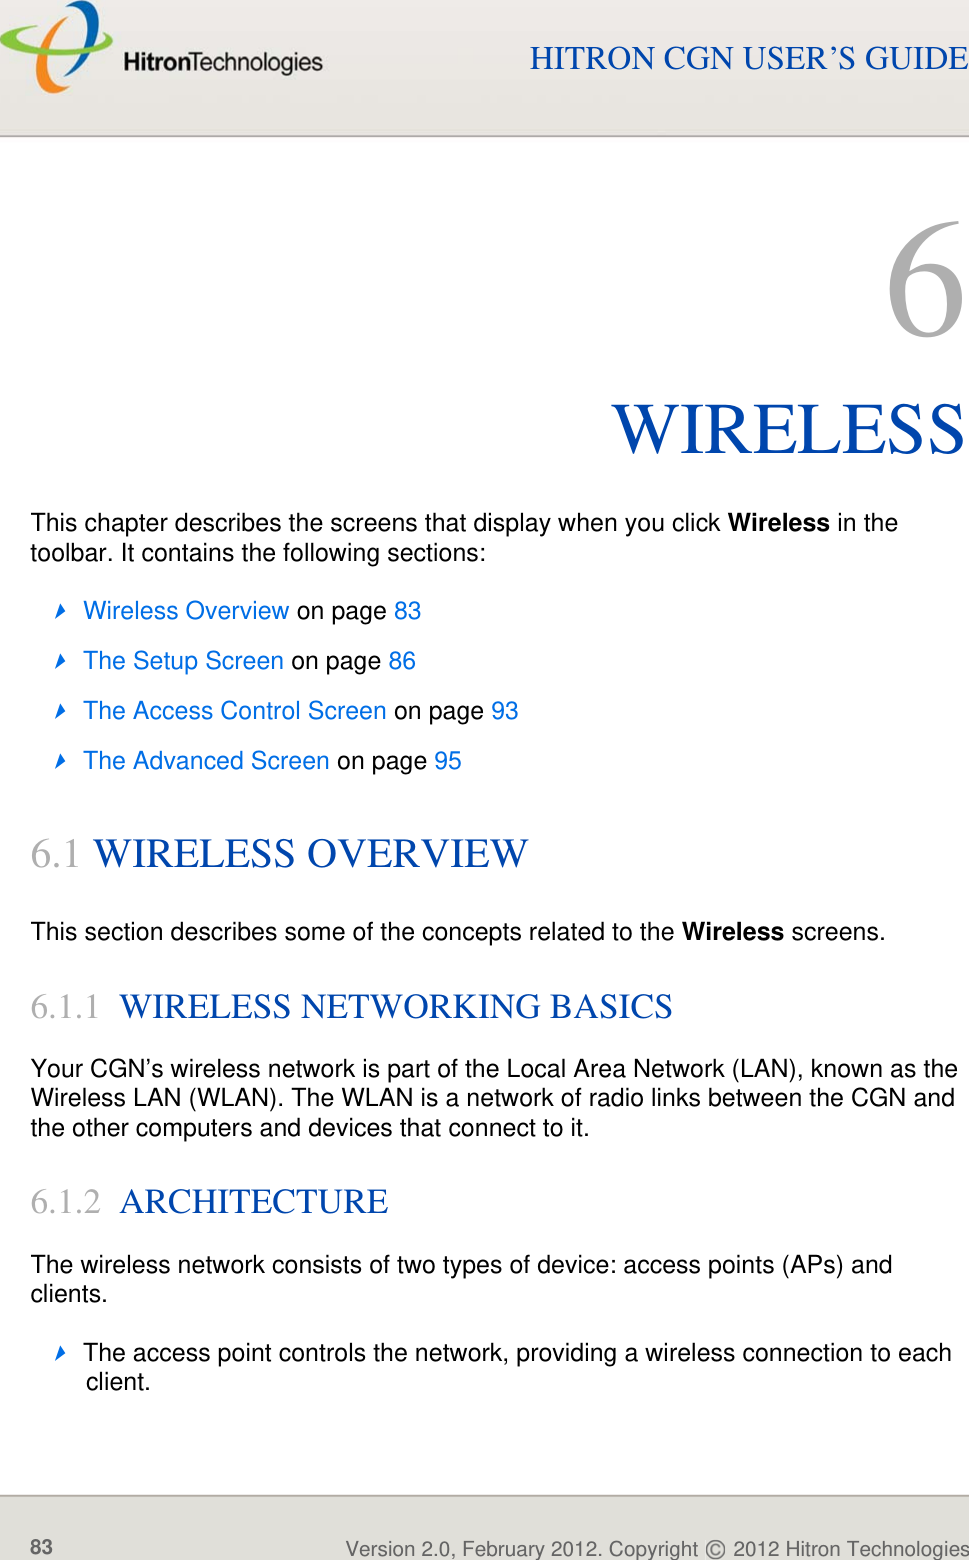 WIRELESSVersion 2.0, February 2012. Copyright   2012 Hitron Technologies83HITRON CGN USER’S GUIDE6WIRELESSThis chapter describes the screens that display when you click Wireless in the toolbar. It contains the following sections:Wireless Overview on page 83The Setup Screen on page 86The Access Control Screen on page 93The Advanced Screen on page 956.1 WIRELESS OVERVIEWThis section describes some of the concepts related to the Wireless screens.6.1.1  WIRELESS NETWORKING BASICS Your CGN’s wireless network is part of the Local Area Network (LAN), known as the Wireless LAN (WLAN). The WLAN is a network of radio links between the CGN and the other computers and devices that connect to it.6.1.2  ARCHITECTUREThe wireless network consists of two types of device: access points (APs) and clients.The access point controls the network, providing a wireless connection to each client.